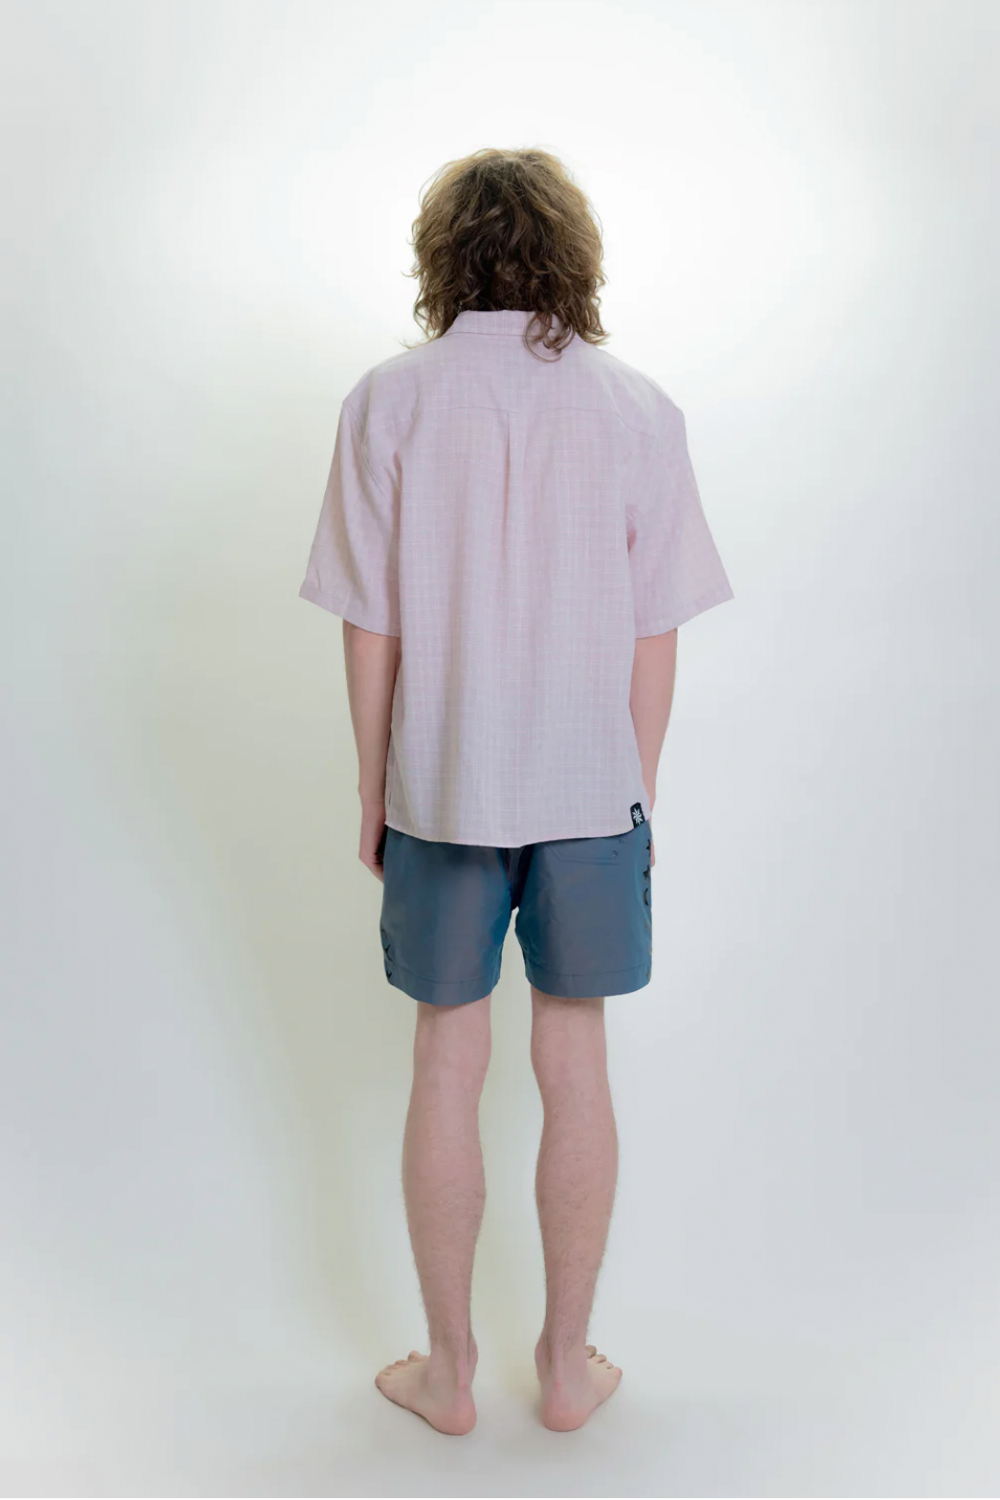 All Day Shirt | Pink Grid